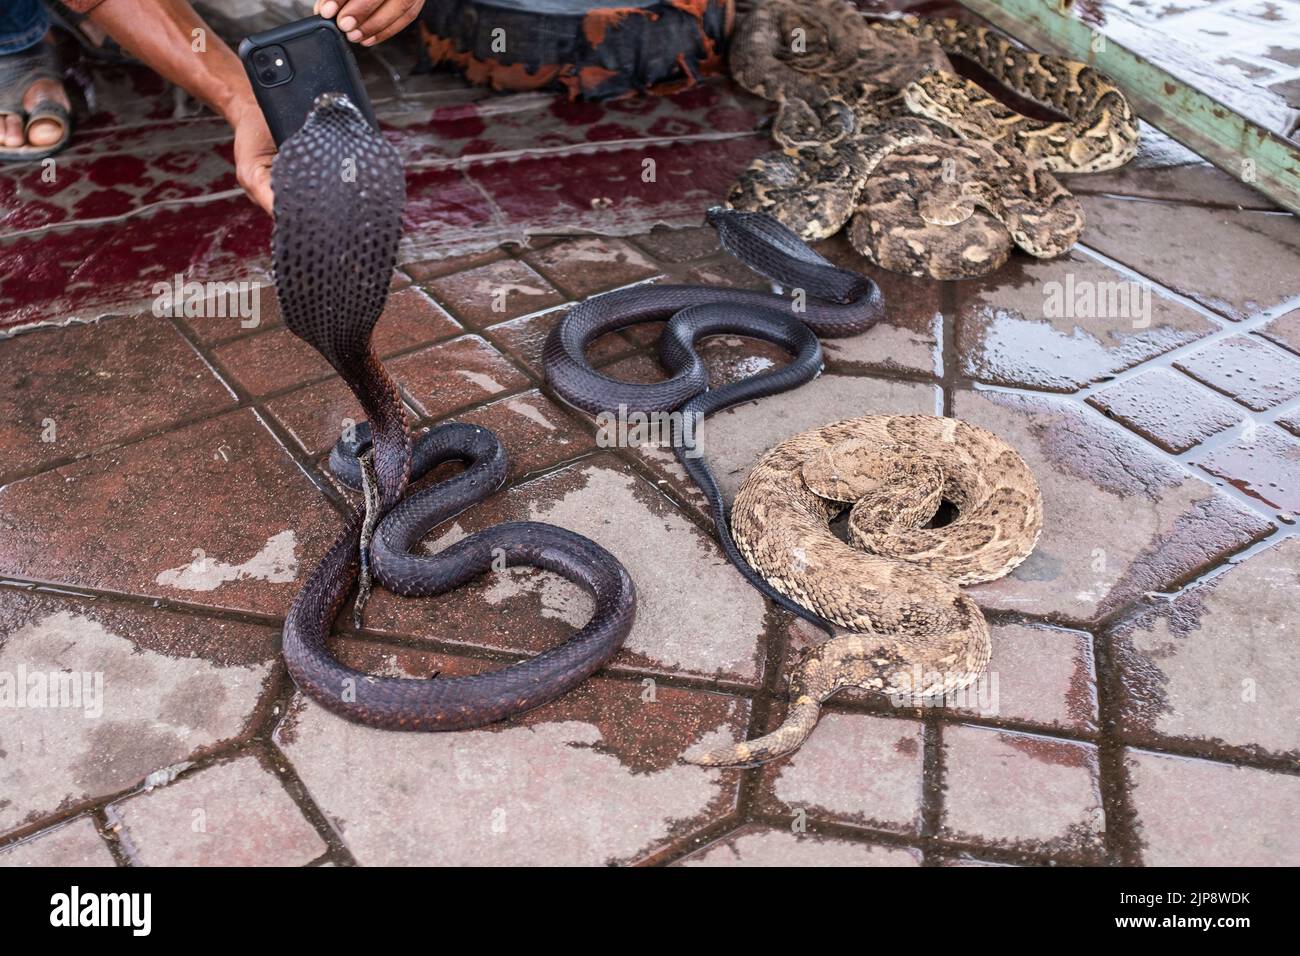 Taking a picture with smart phone of a tamed cobra snake on a touristic place in Marrakesh, Morocco Stock Photo